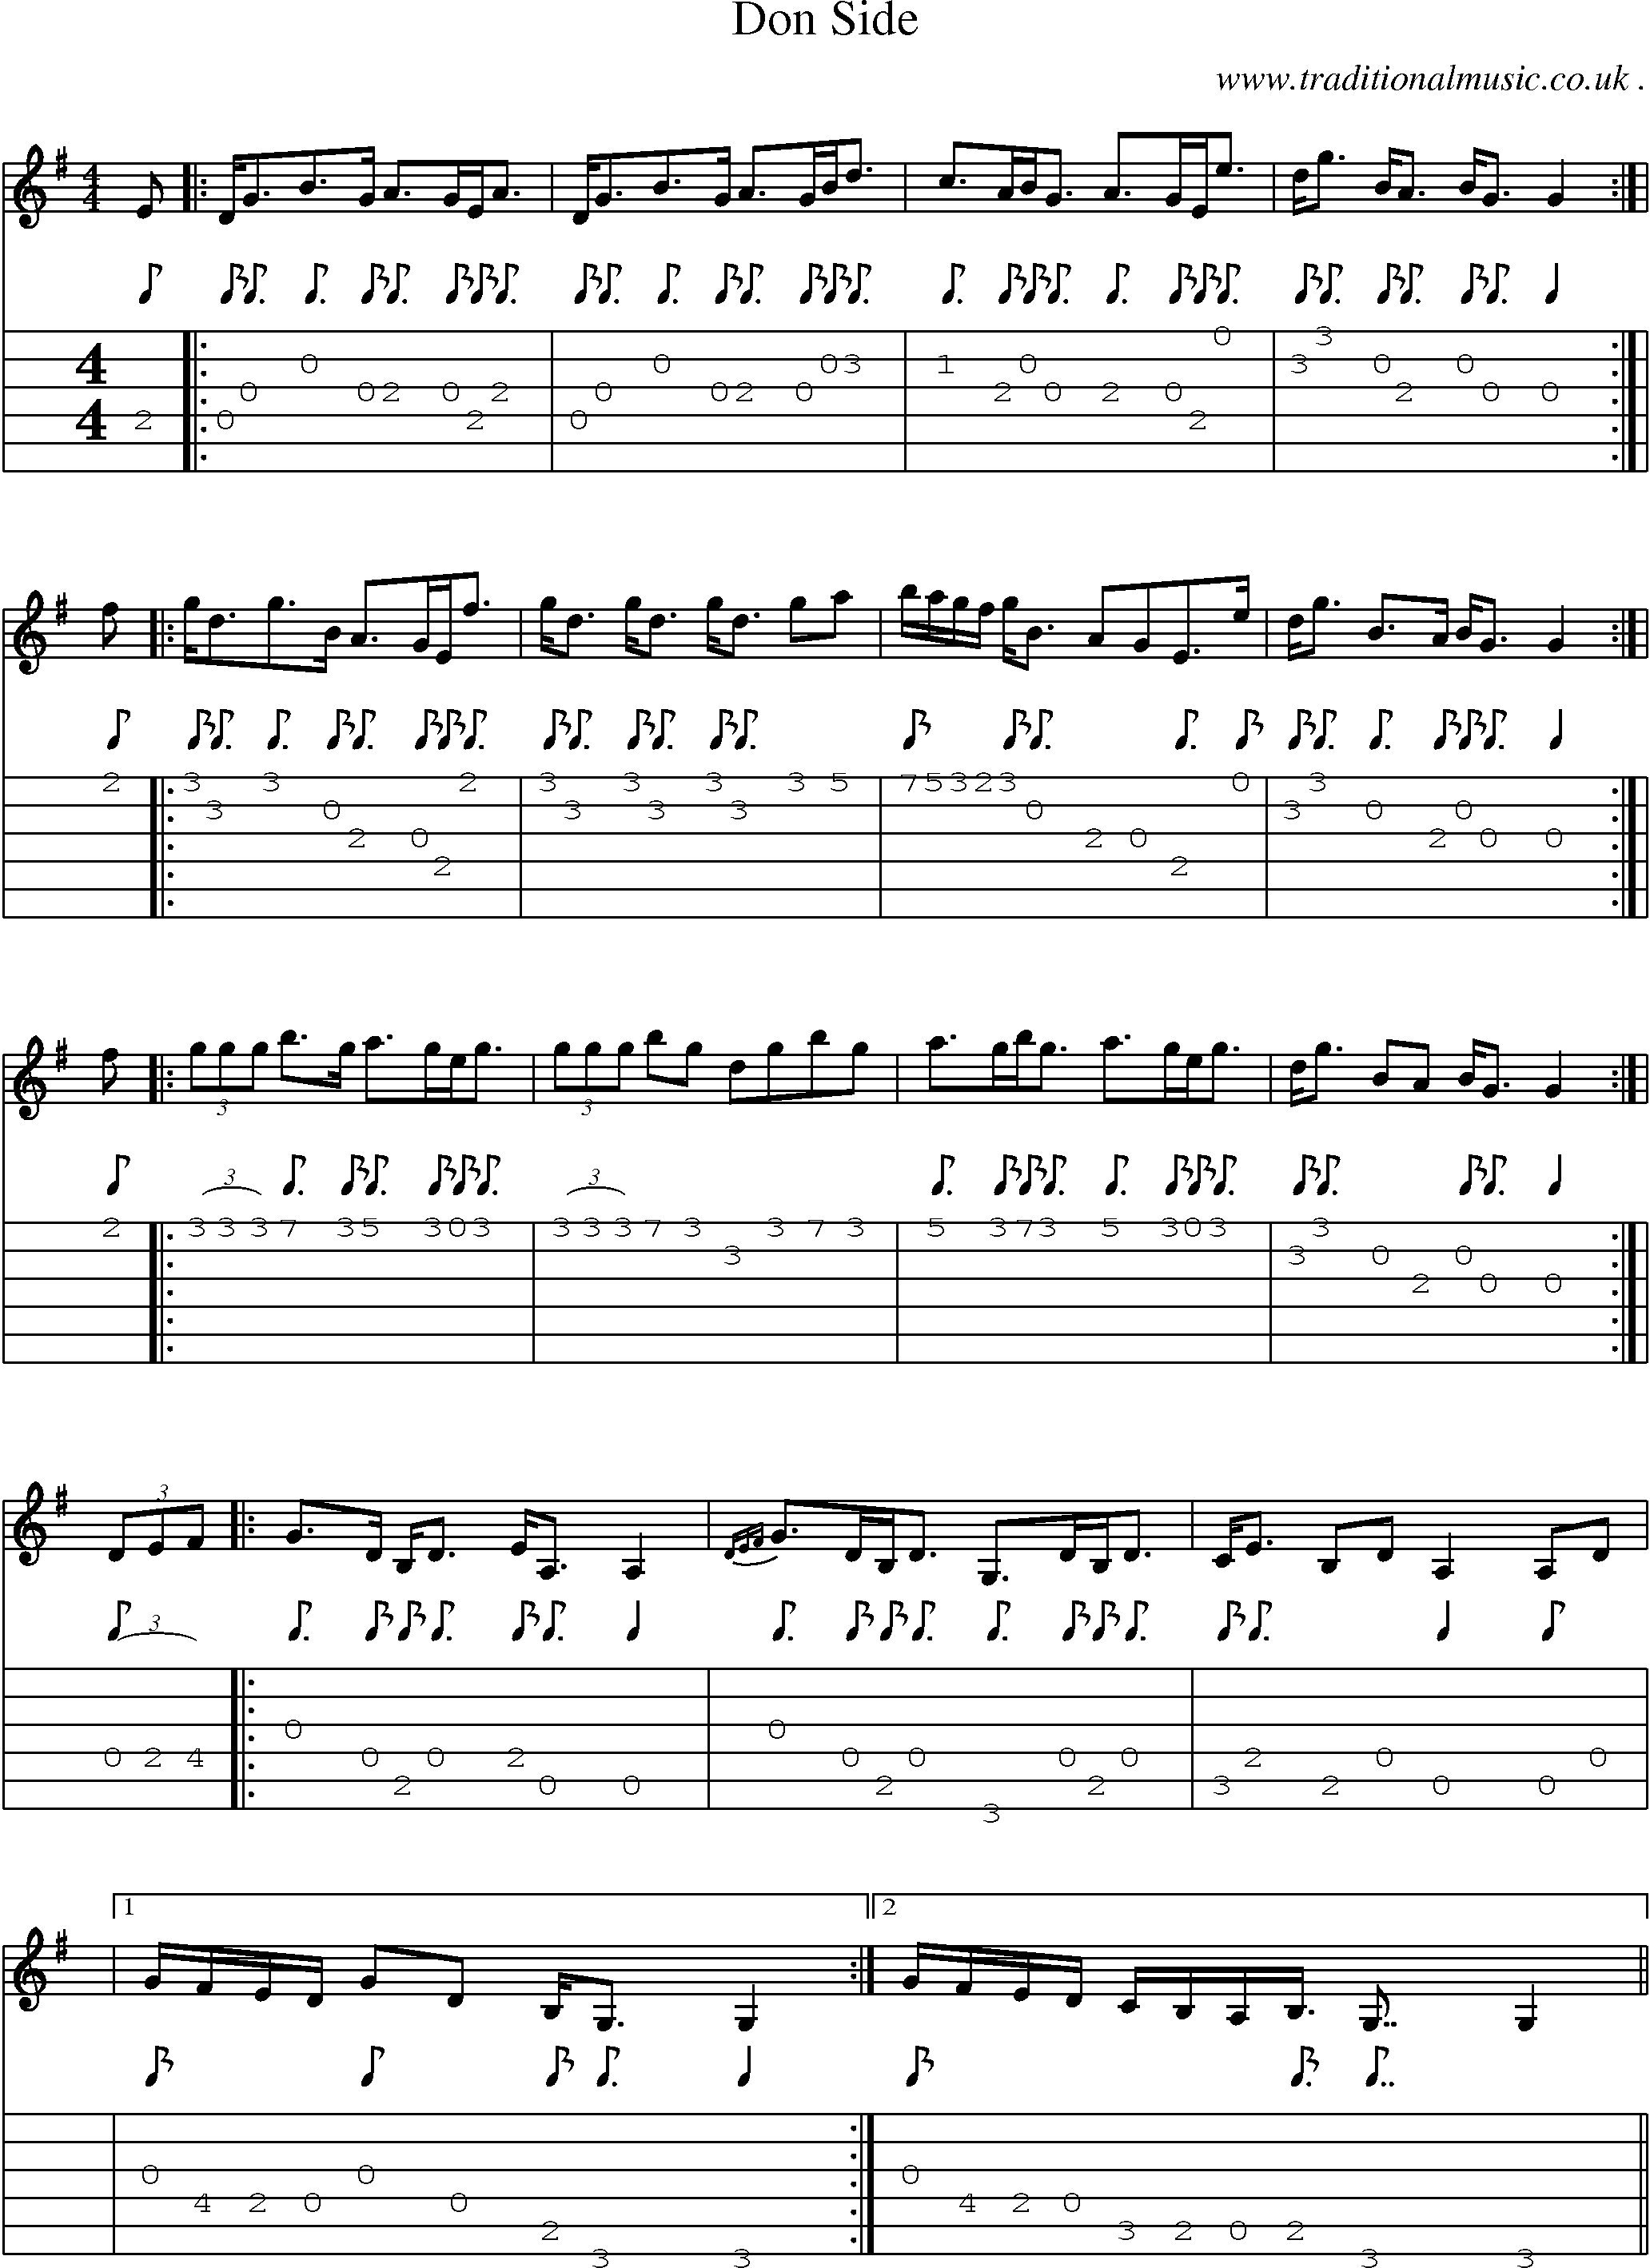 Music Score and Guitar Tabs for Don Side